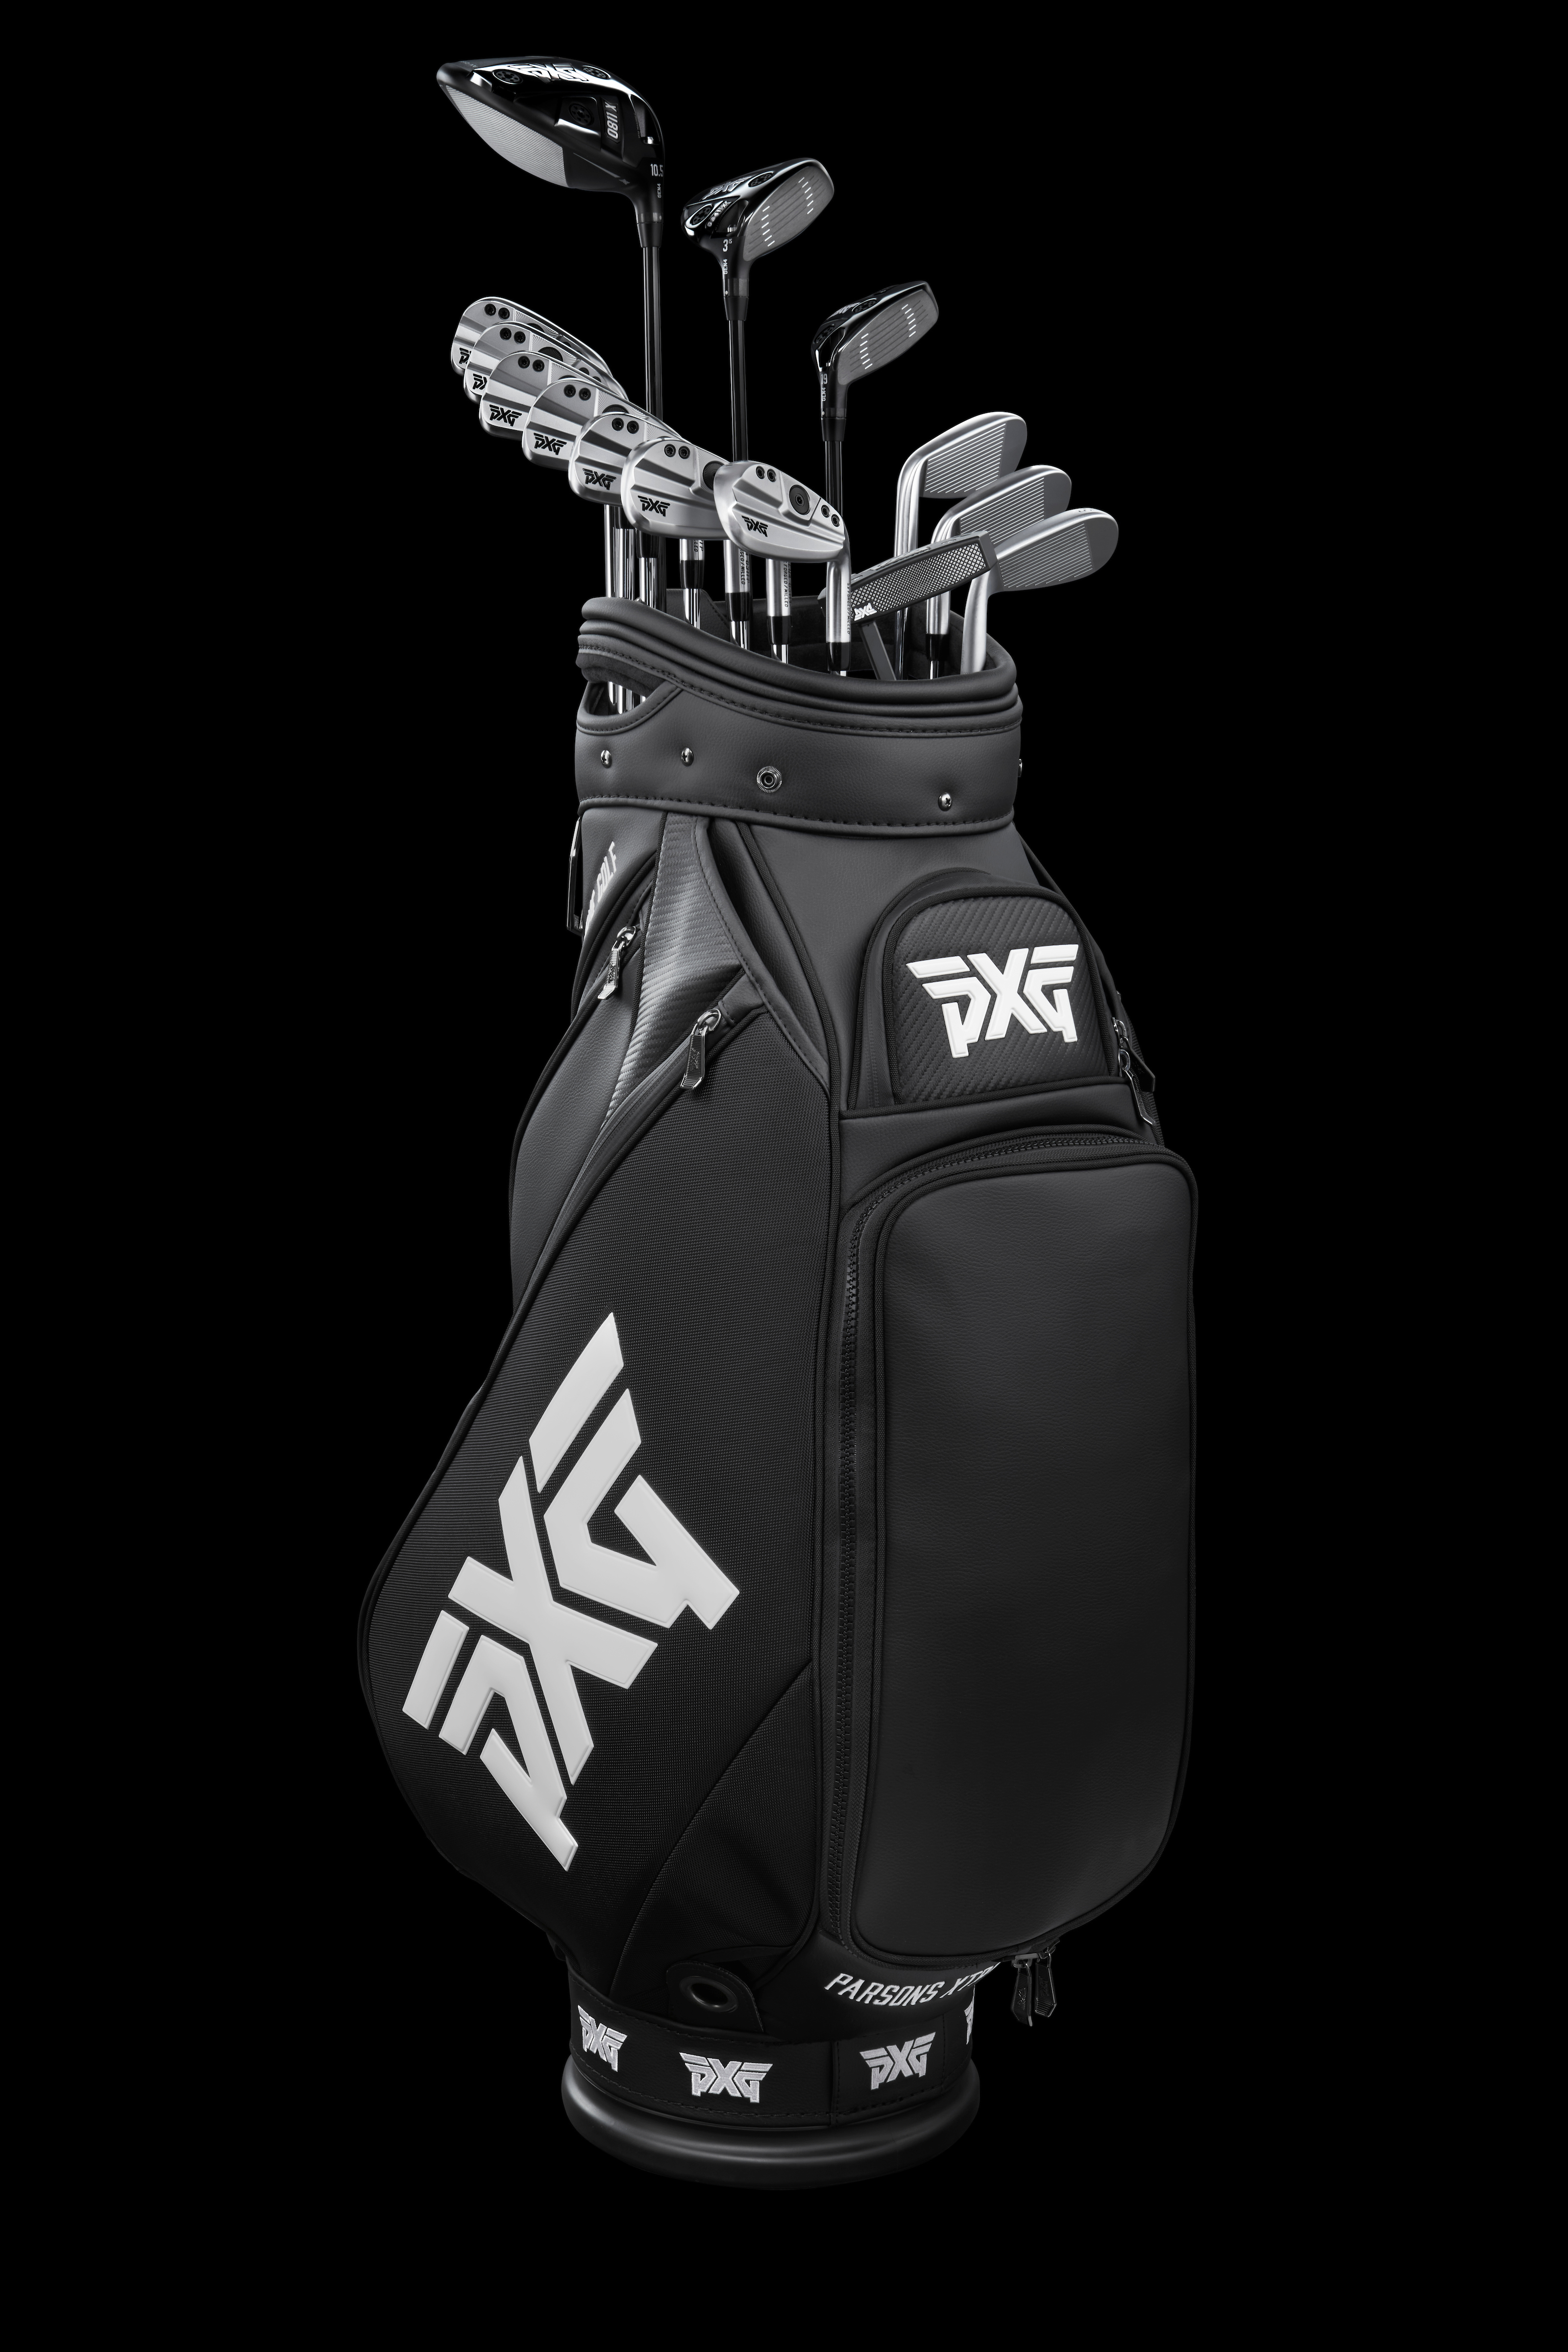 Driver to Putter, PXG's flagship golf clubs deliver explosive performance.